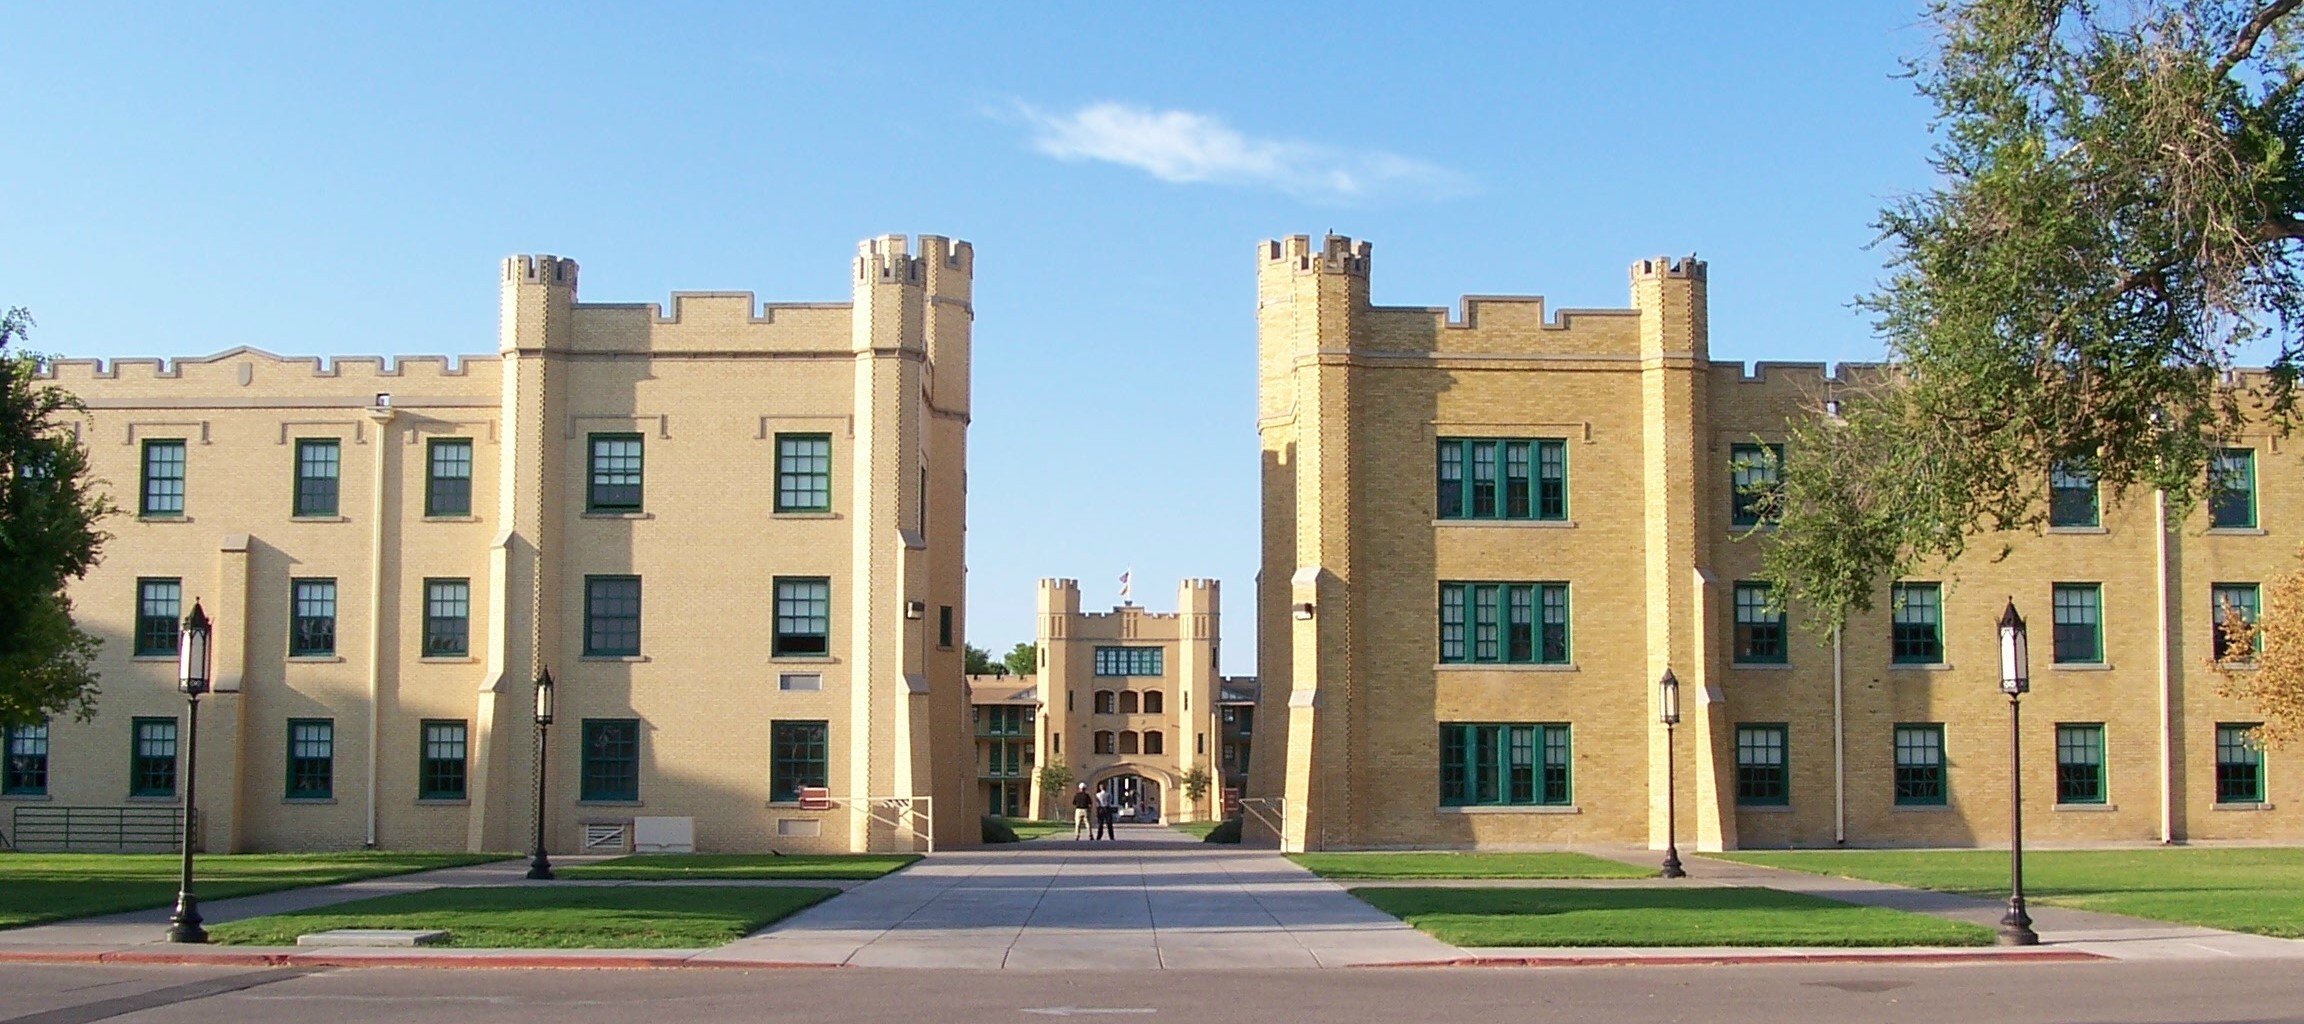 New Mexico Military Institute Case Study